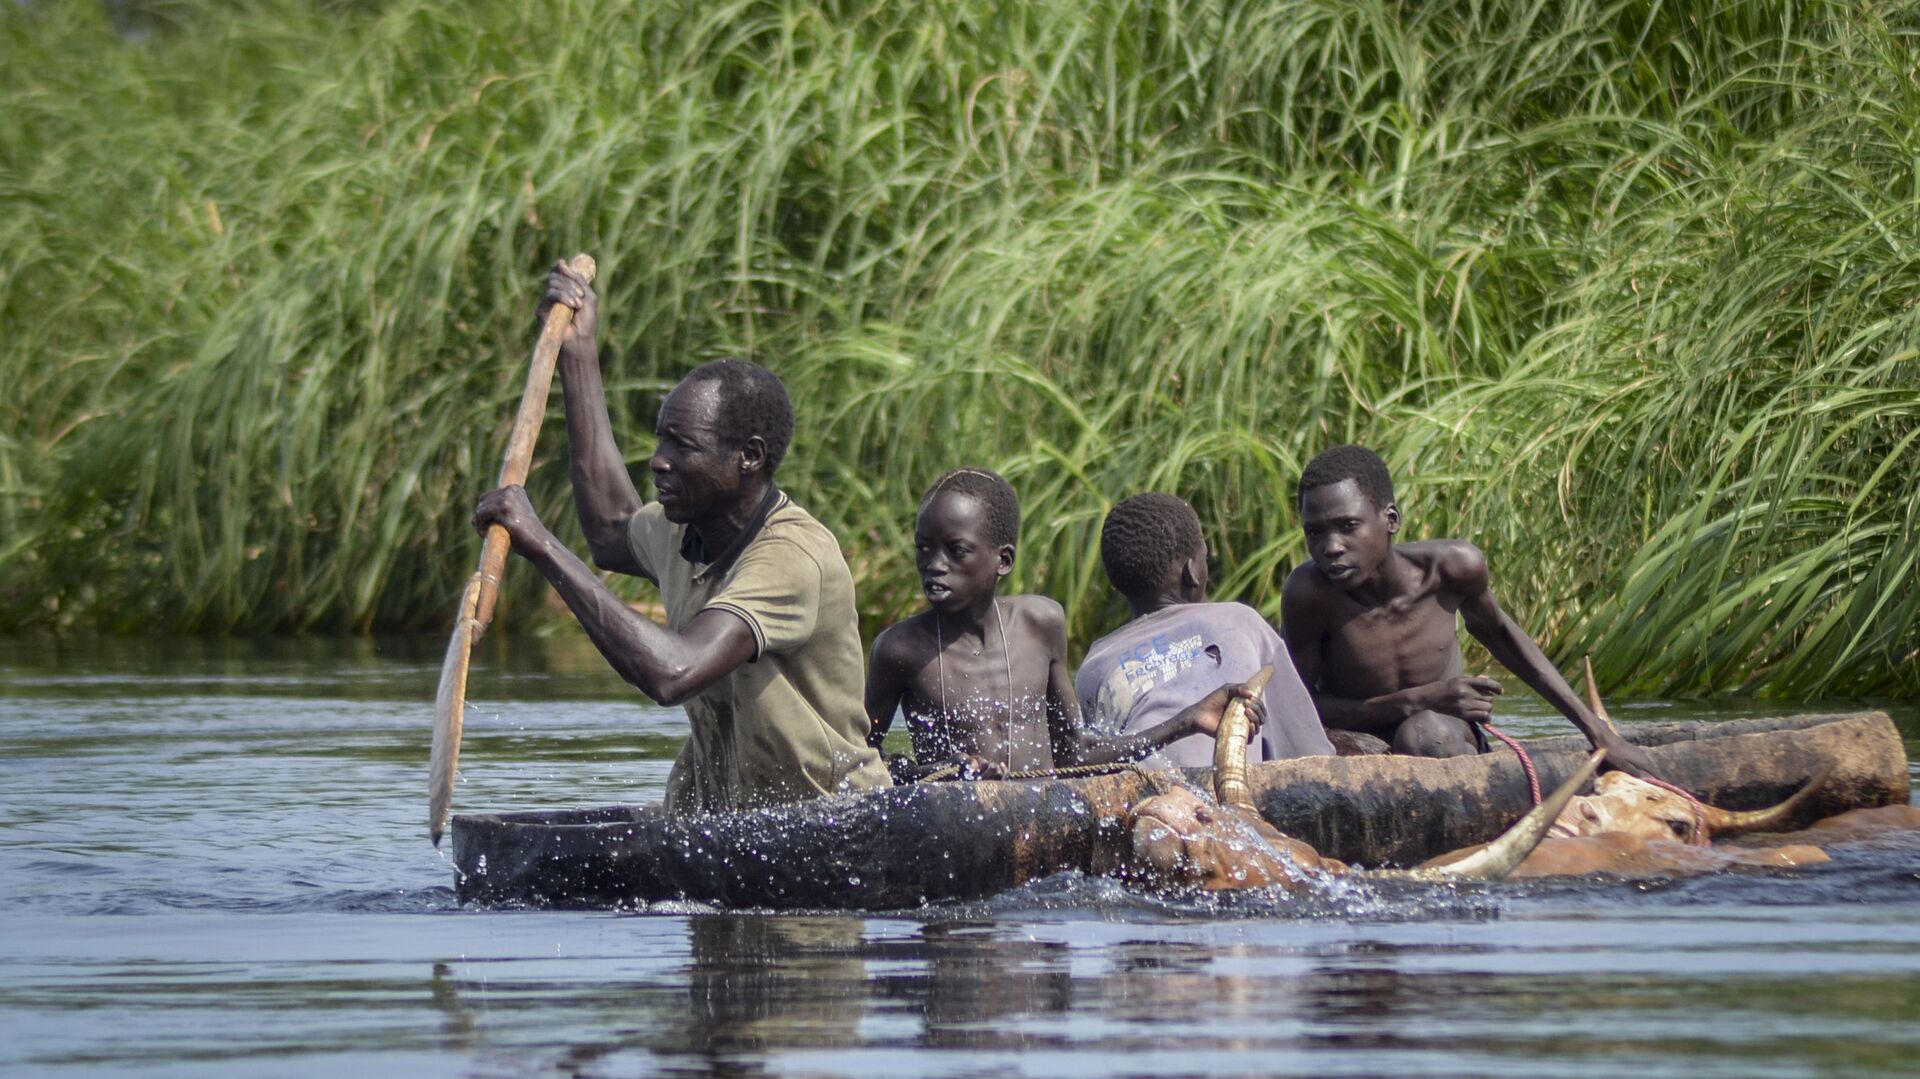 A father and his sons transport cows from a flooded area to drier ground using a dugout canoe, in Old Fangak county, Jonglei state, South Sudan Wednesday, Nov. 25, 2020.  - Sputnik International, 1920, 23.10.2021